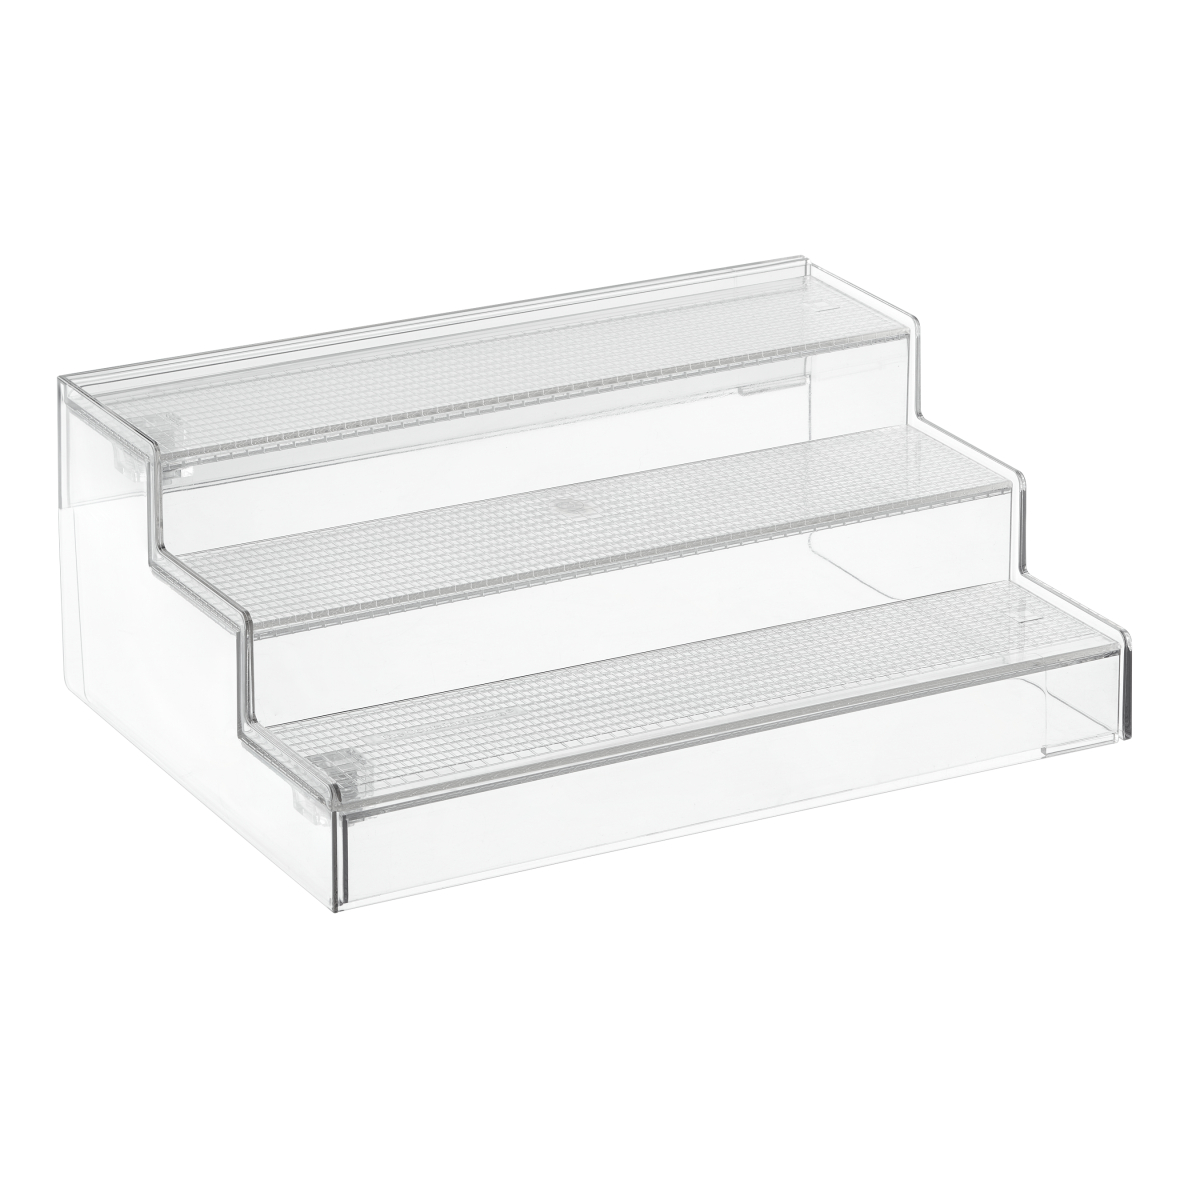 https://www.containerstore.com/catalogimages/472788/10090075-expanding-3-tier-cabinet-or.jpg